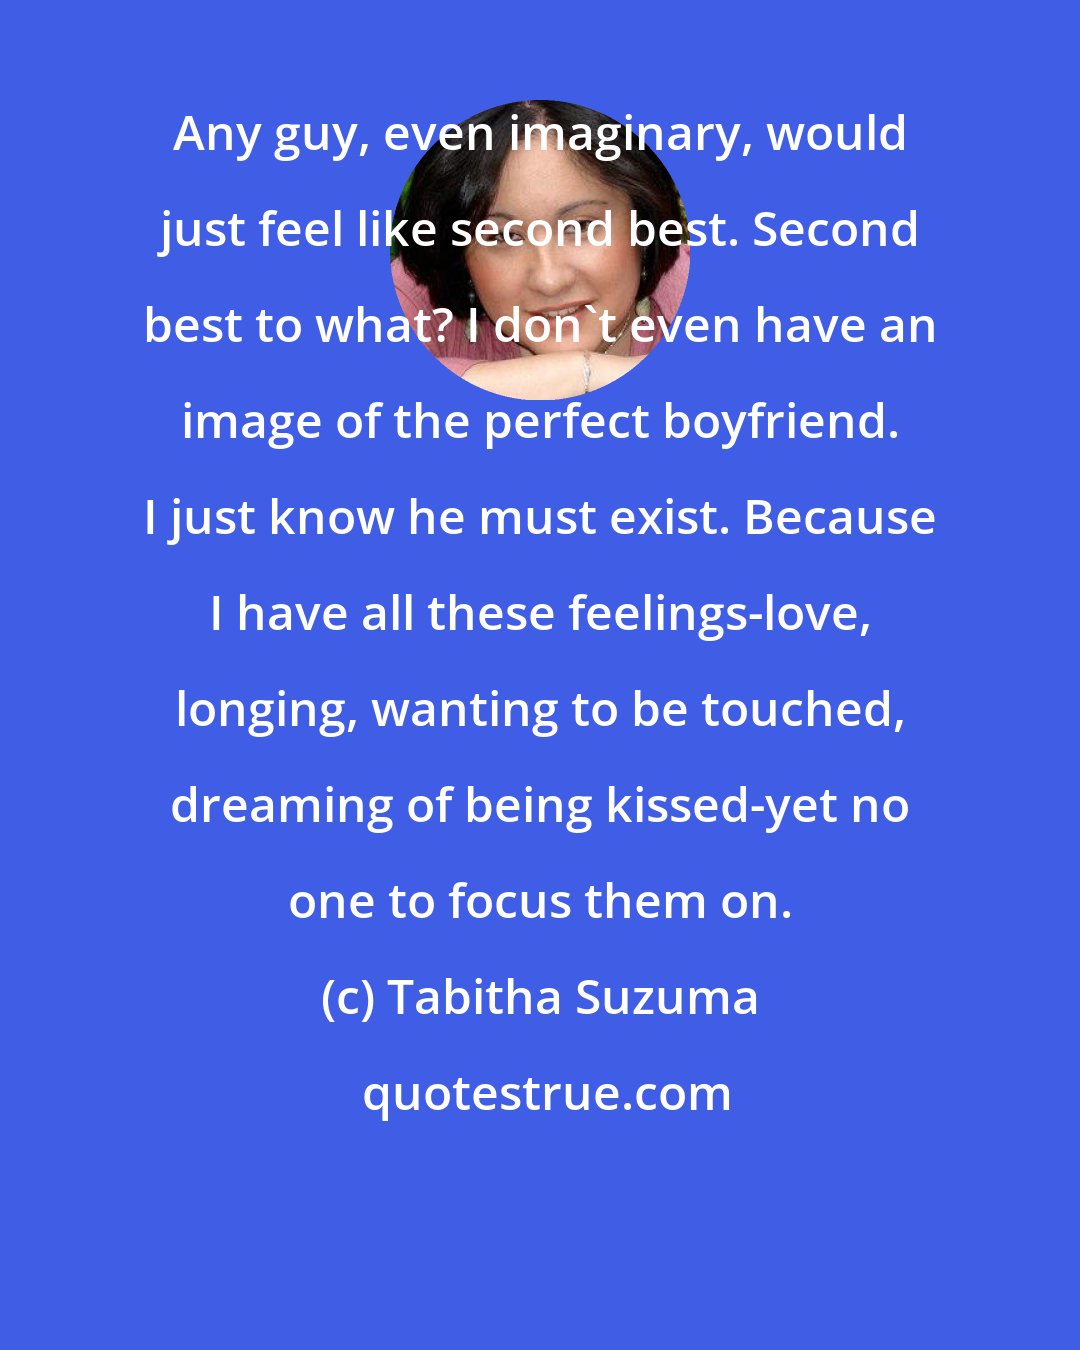 Tabitha Suzuma: Any guy, even imaginary, would just feel like second best. Second best to what? I don't even have an image of the perfect boyfriend. I just know he must exist. Because I have all these feelings-love, longing, wanting to be touched, dreaming of being kissed-yet no one to focus them on.